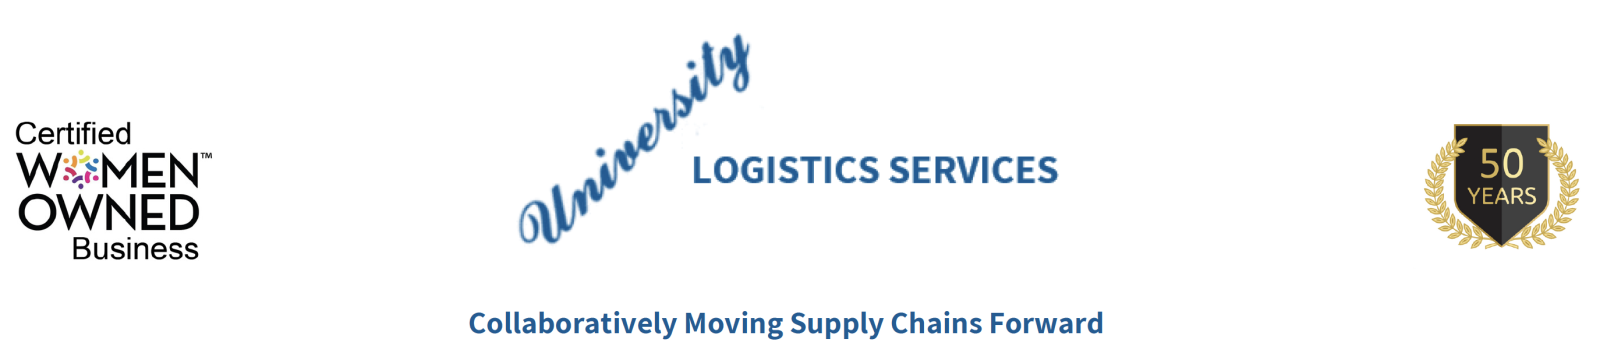 The Top Logistics Company in the Midwest